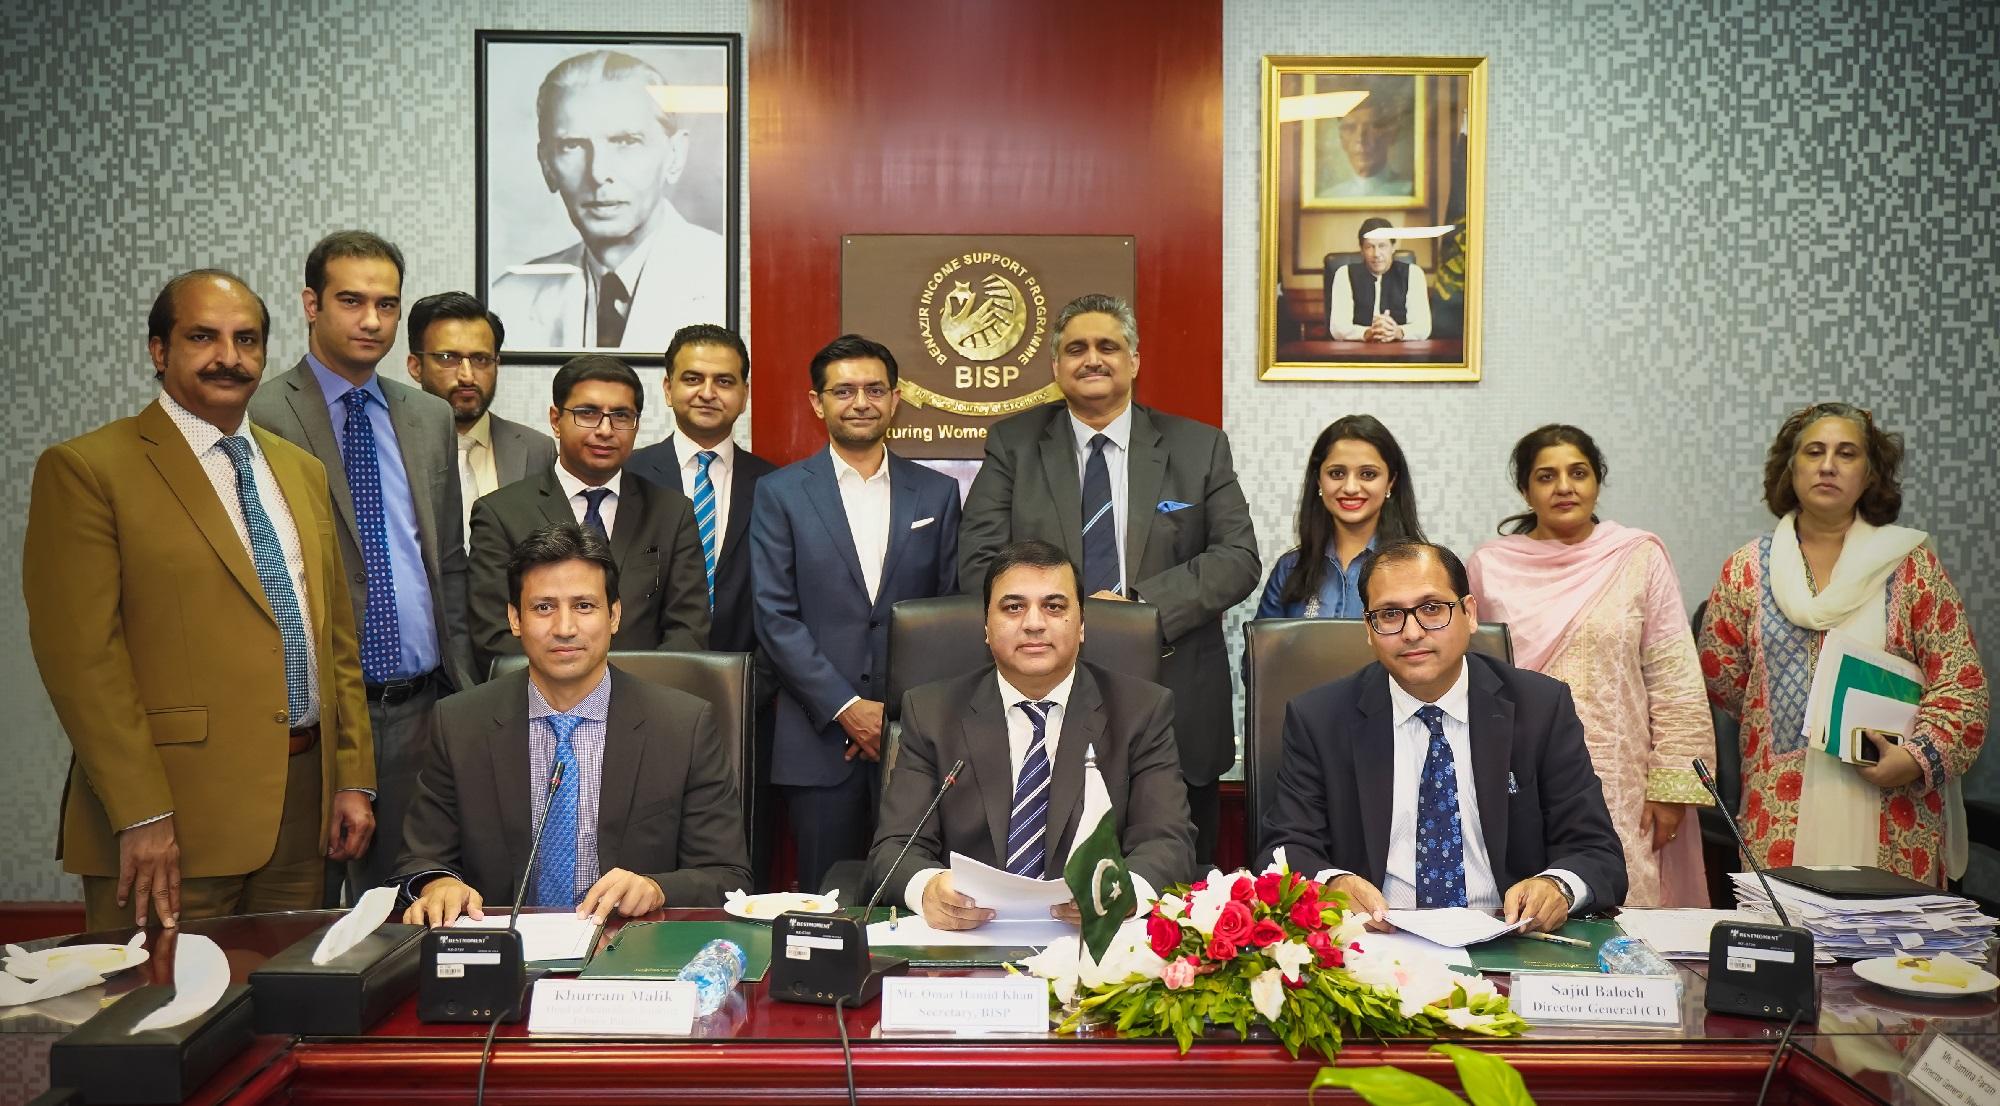 Telenor Pakistan and Telenor Microfinance Bank join hands with BISP to empower beneficiaries through business opportunity &microlending